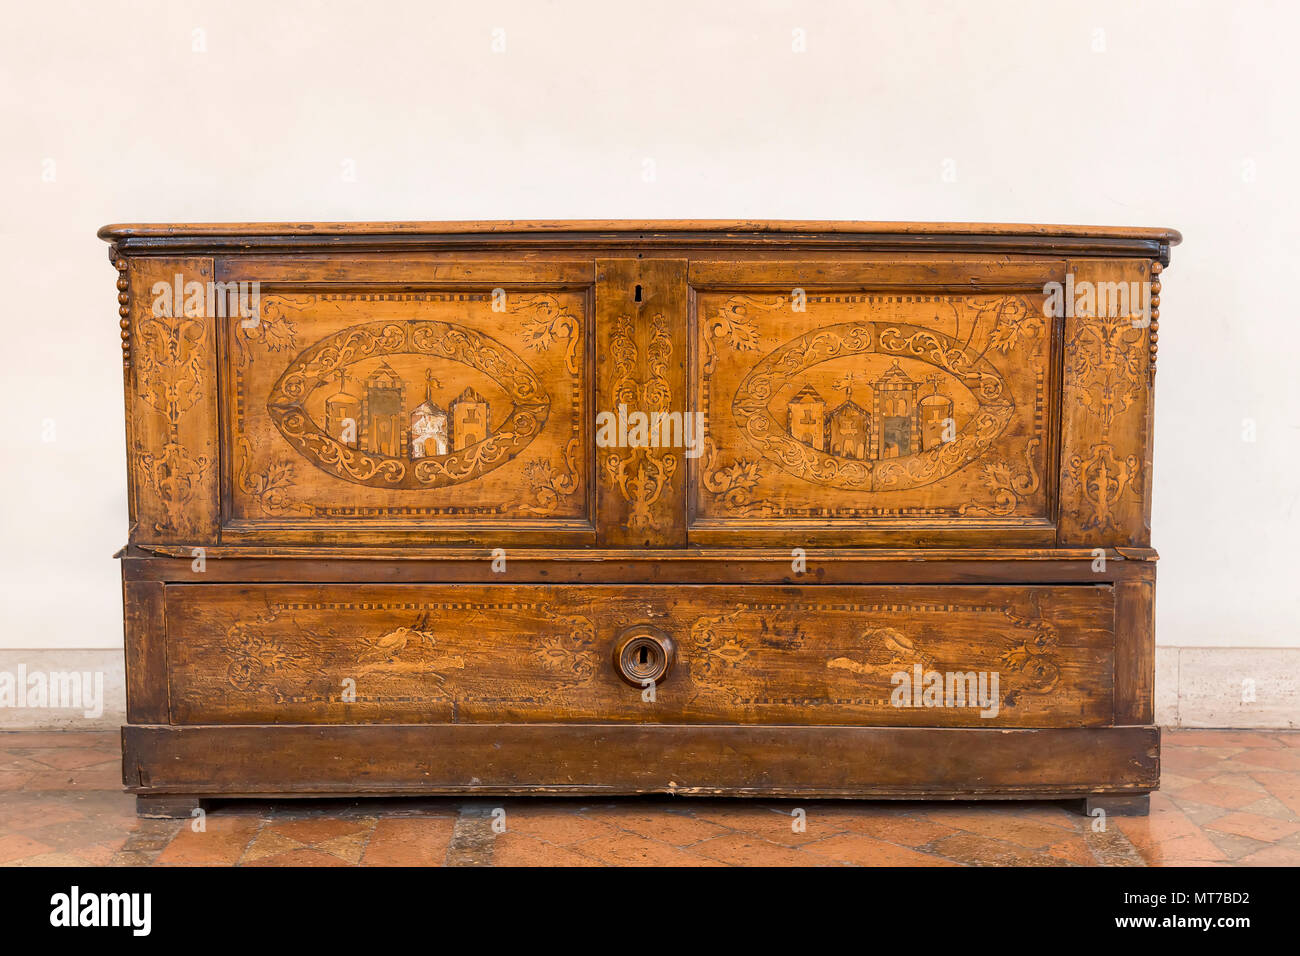 Antique Italian Wooden Dresser Vintage Old Wood Front View Stock Photo Alamy